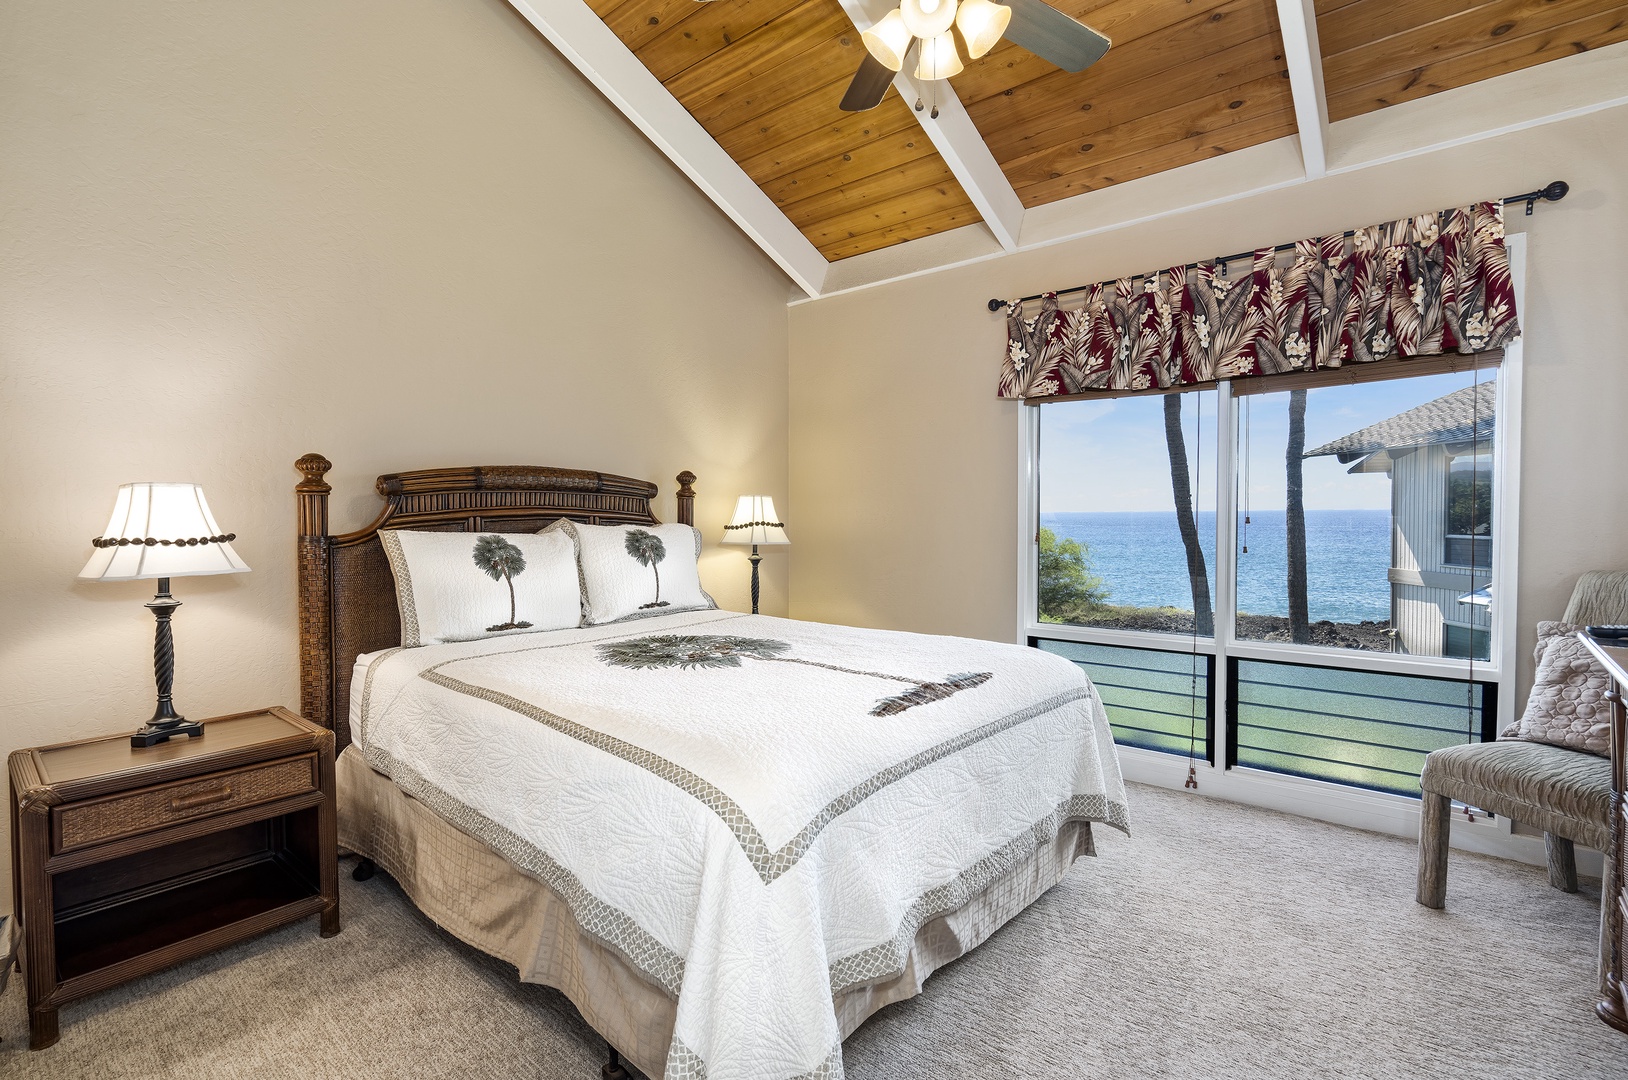 Kailua Kona Vacation Rentals, Kanaloa at Kona 3304 - Guest bedroom with stellar ocean views! Queen bed, and A/C